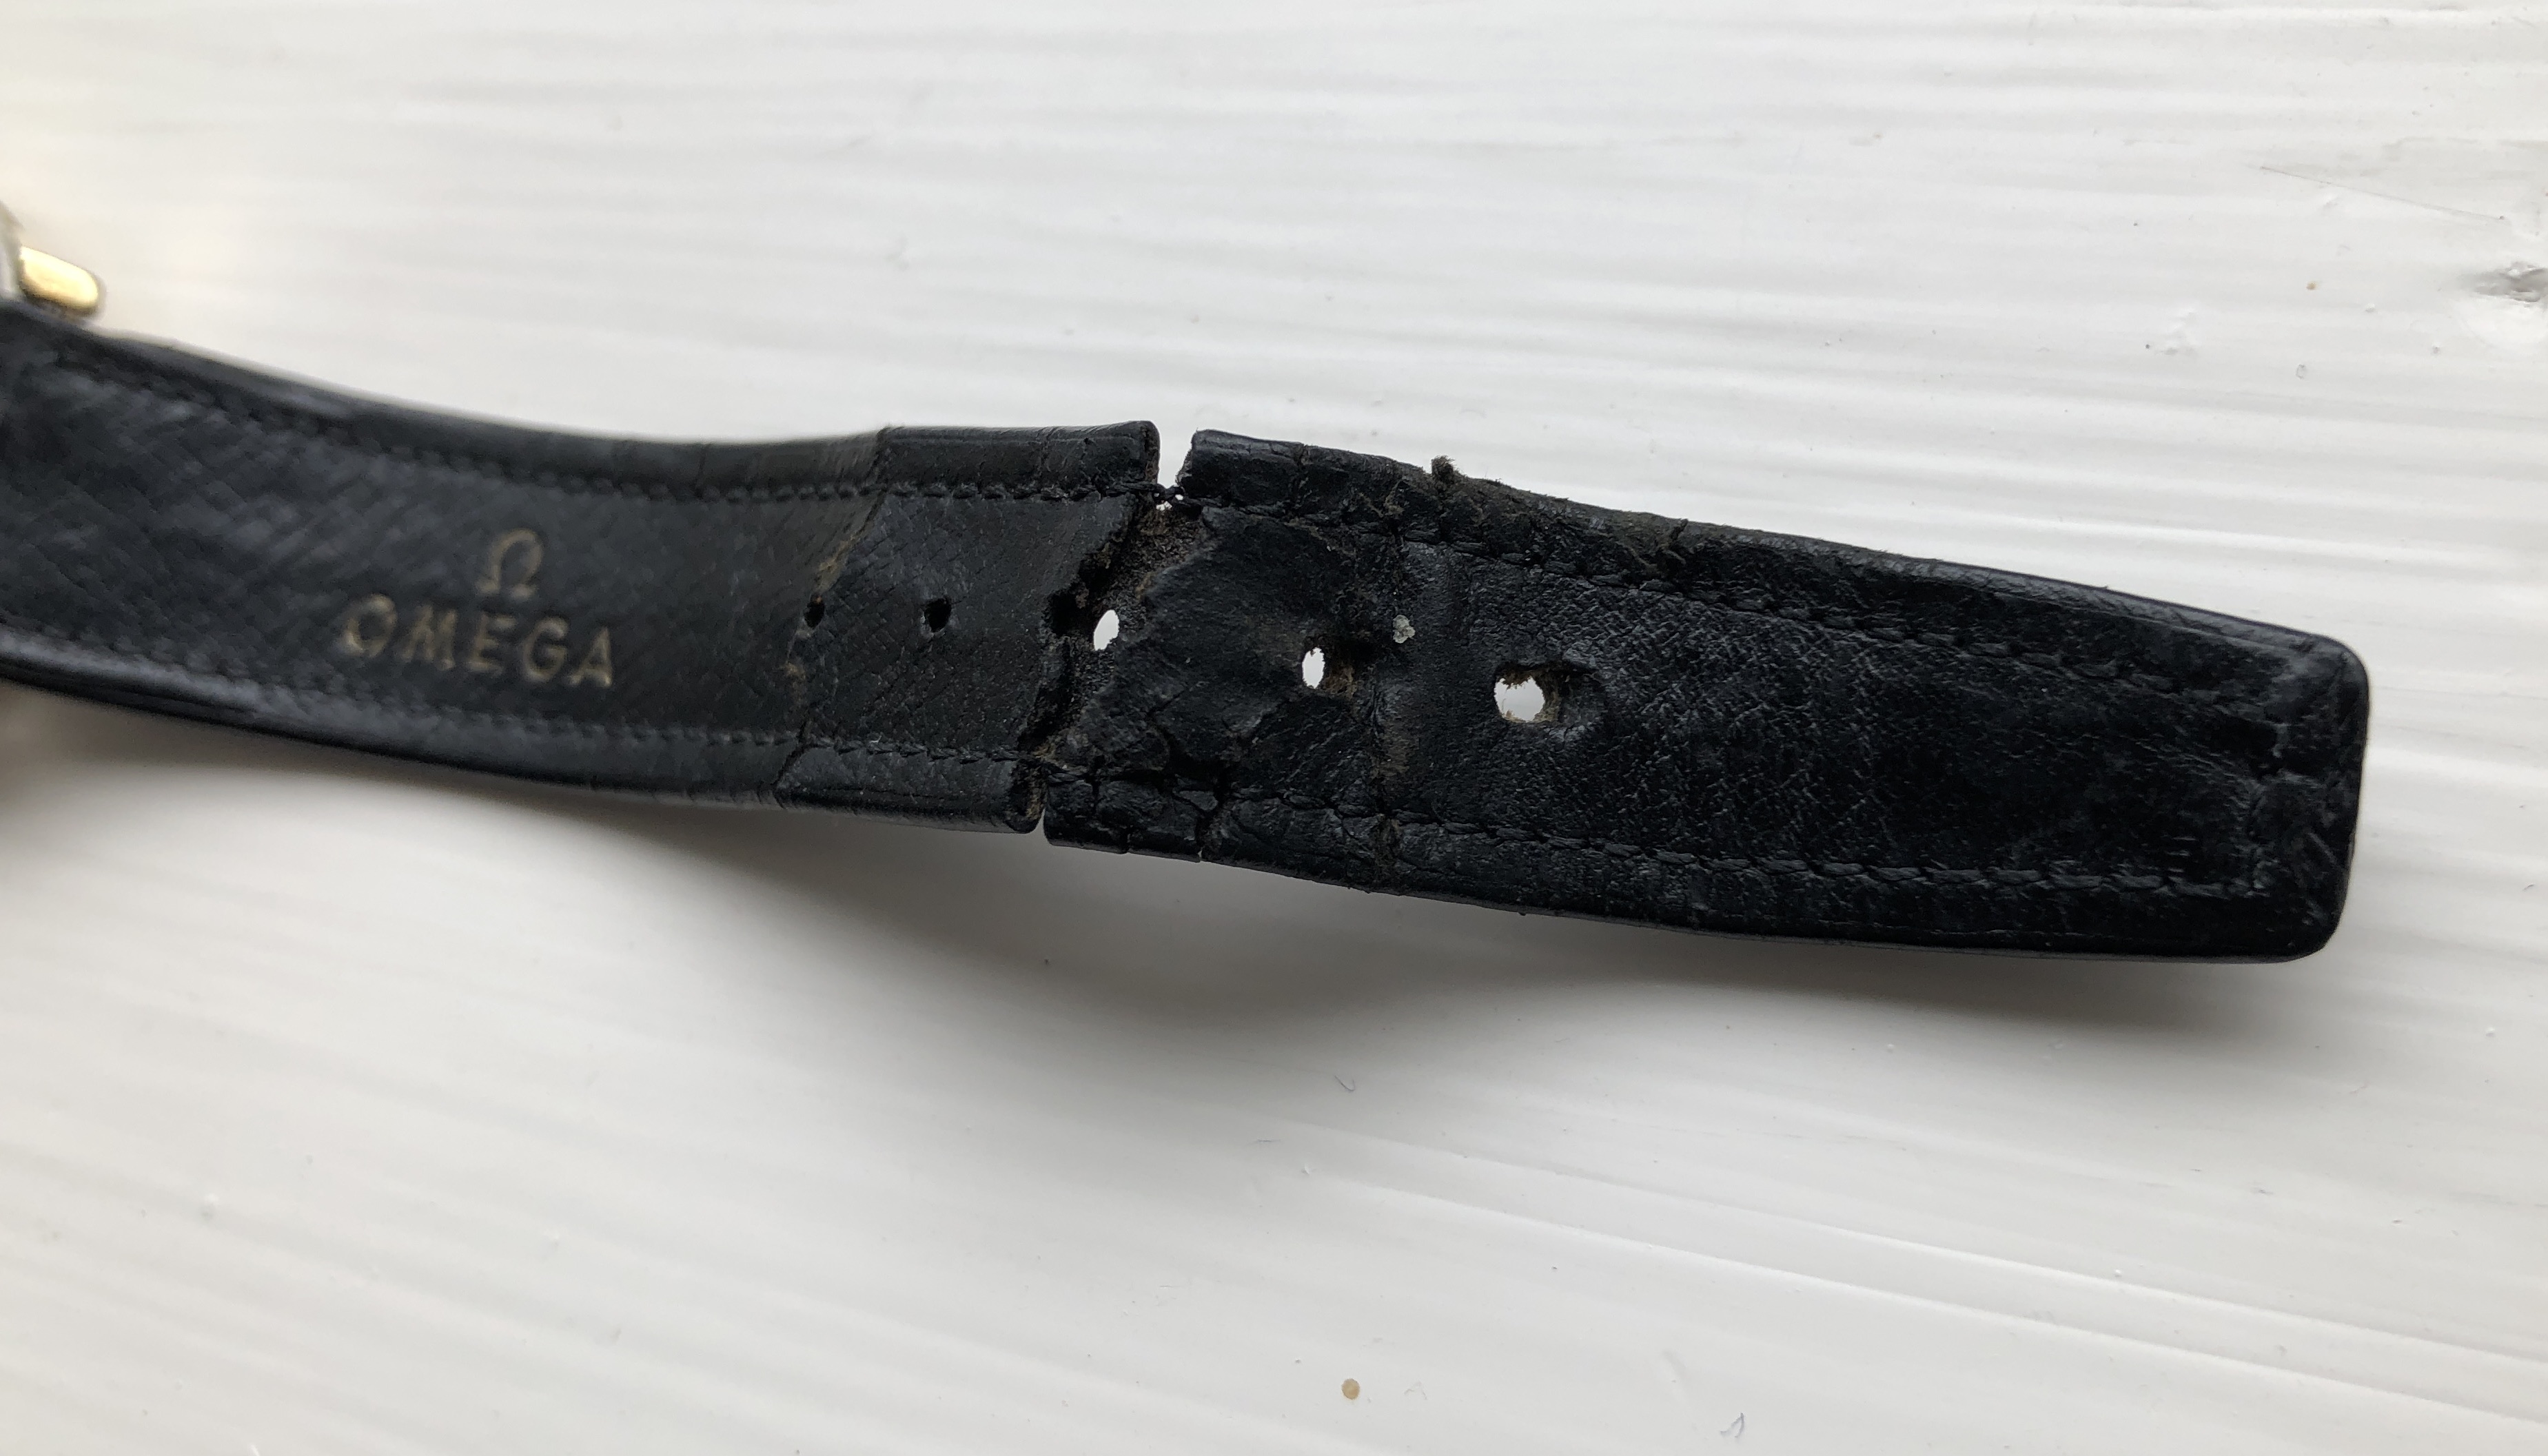 Cracked leather band repair